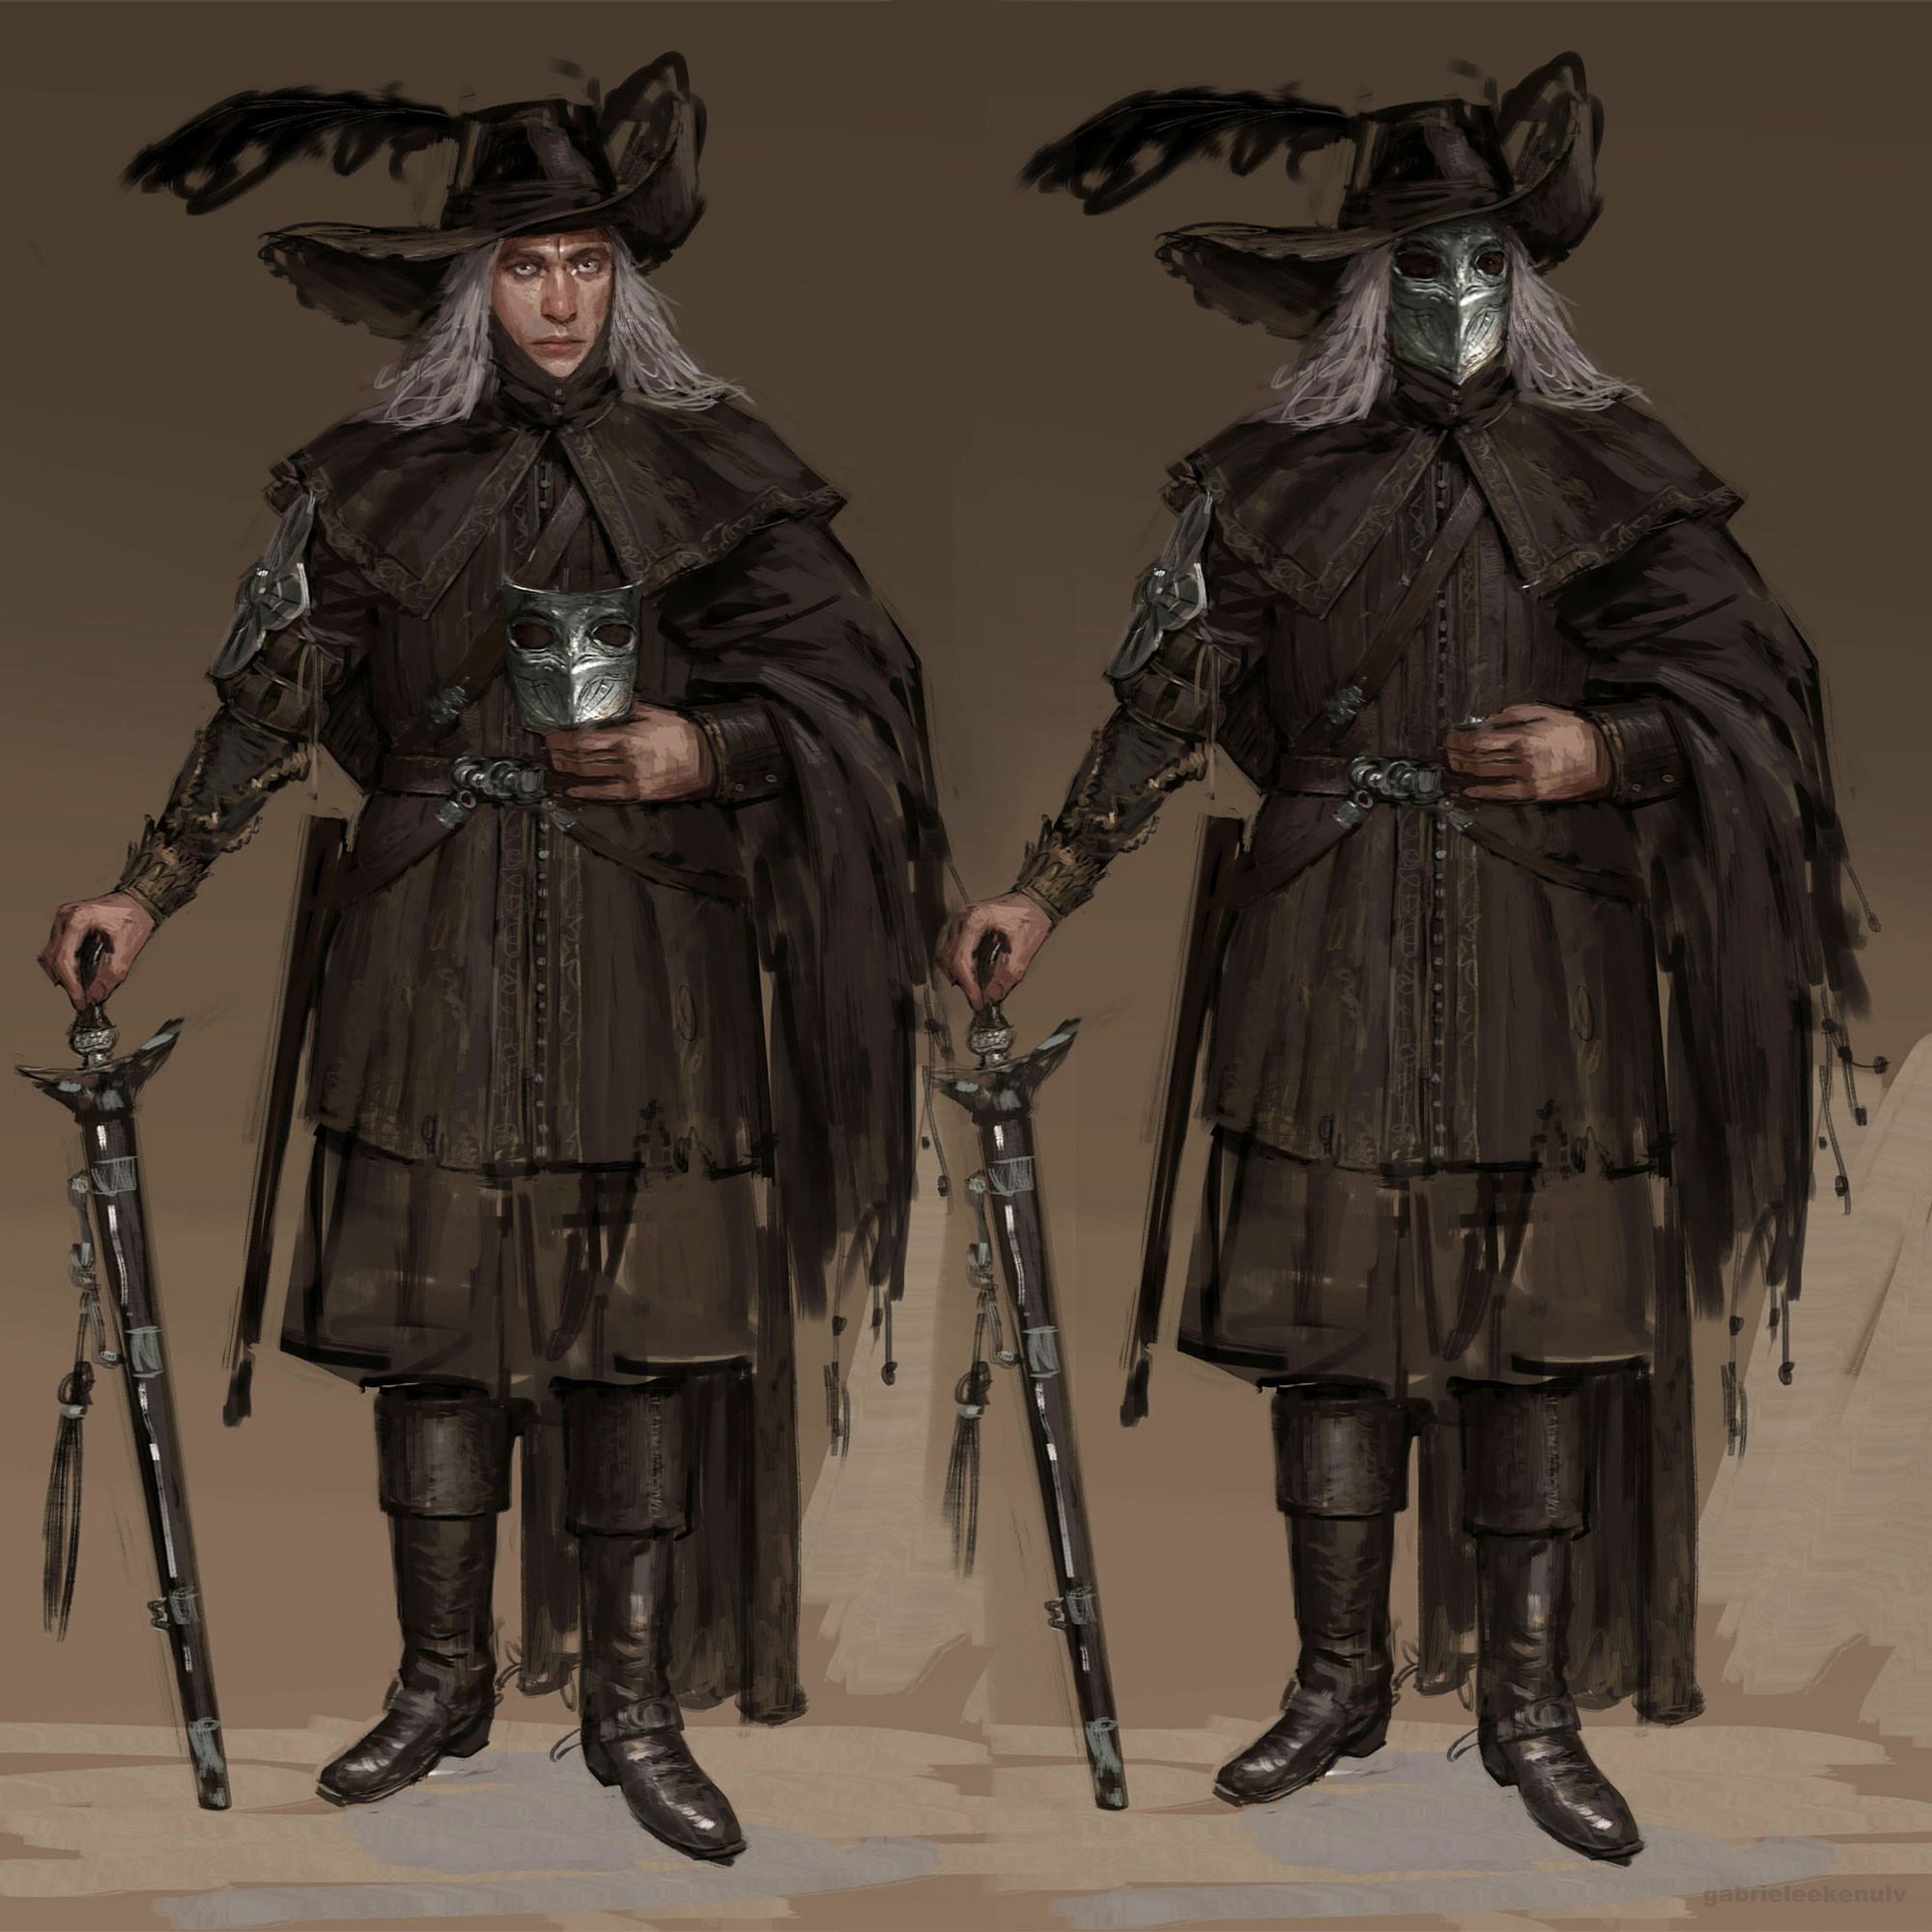 Character concept loosely based on a recurring figure in some of the concept art by Adam Adamowicz for The Shivering Isles. From 2021/22, for Skyblivion. Also inspired by concepts for Dark Souls 3.